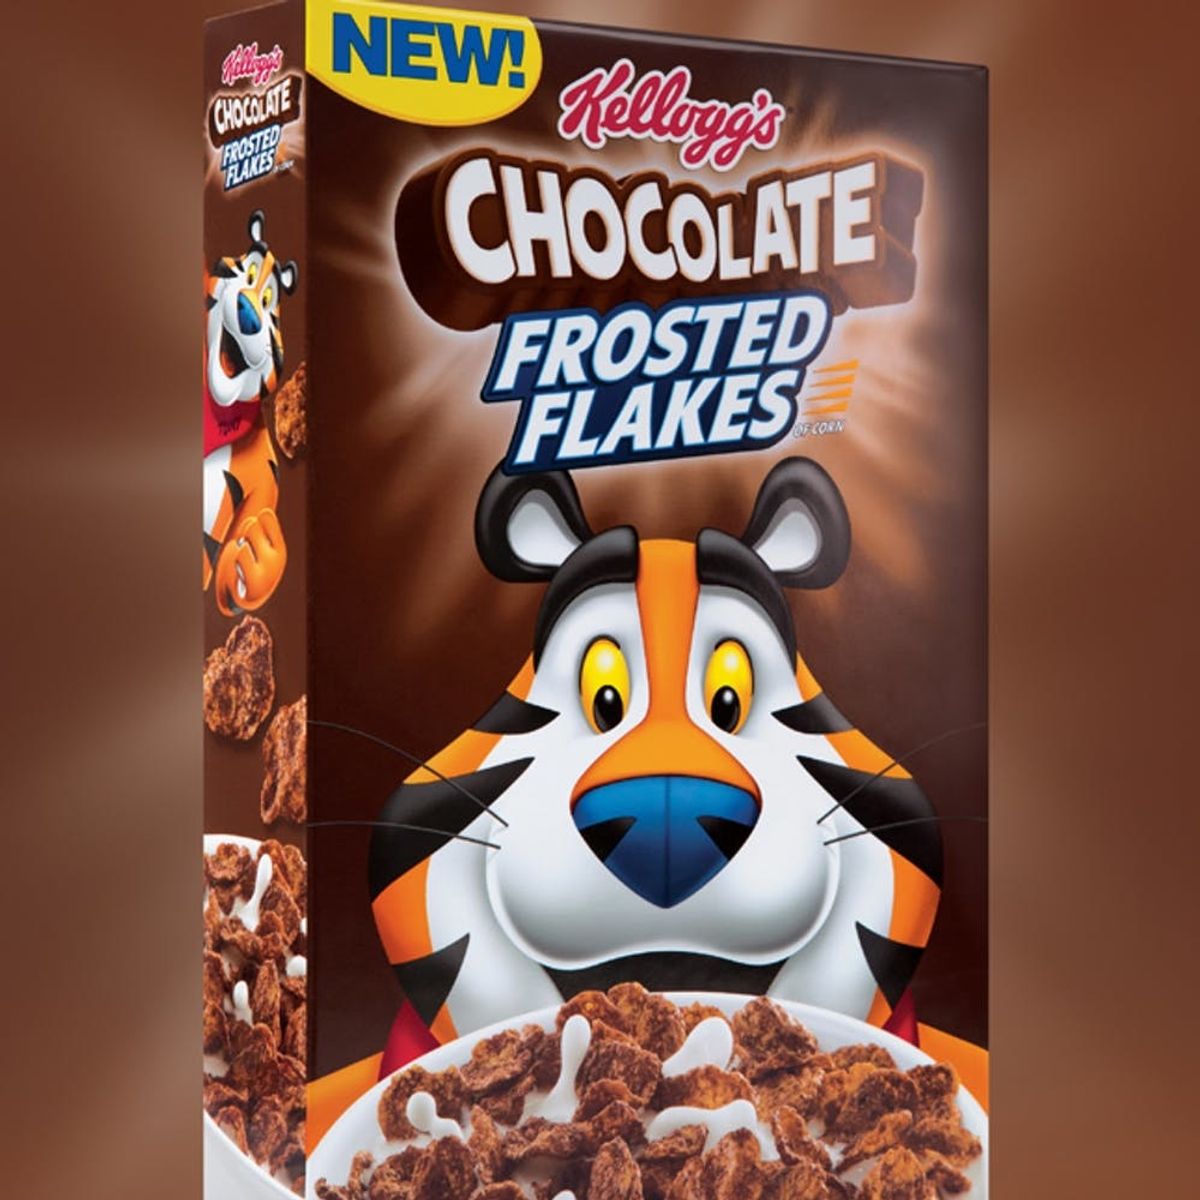 Kellogg’s Is Releasing CHOCOLATE Frosted Flakes